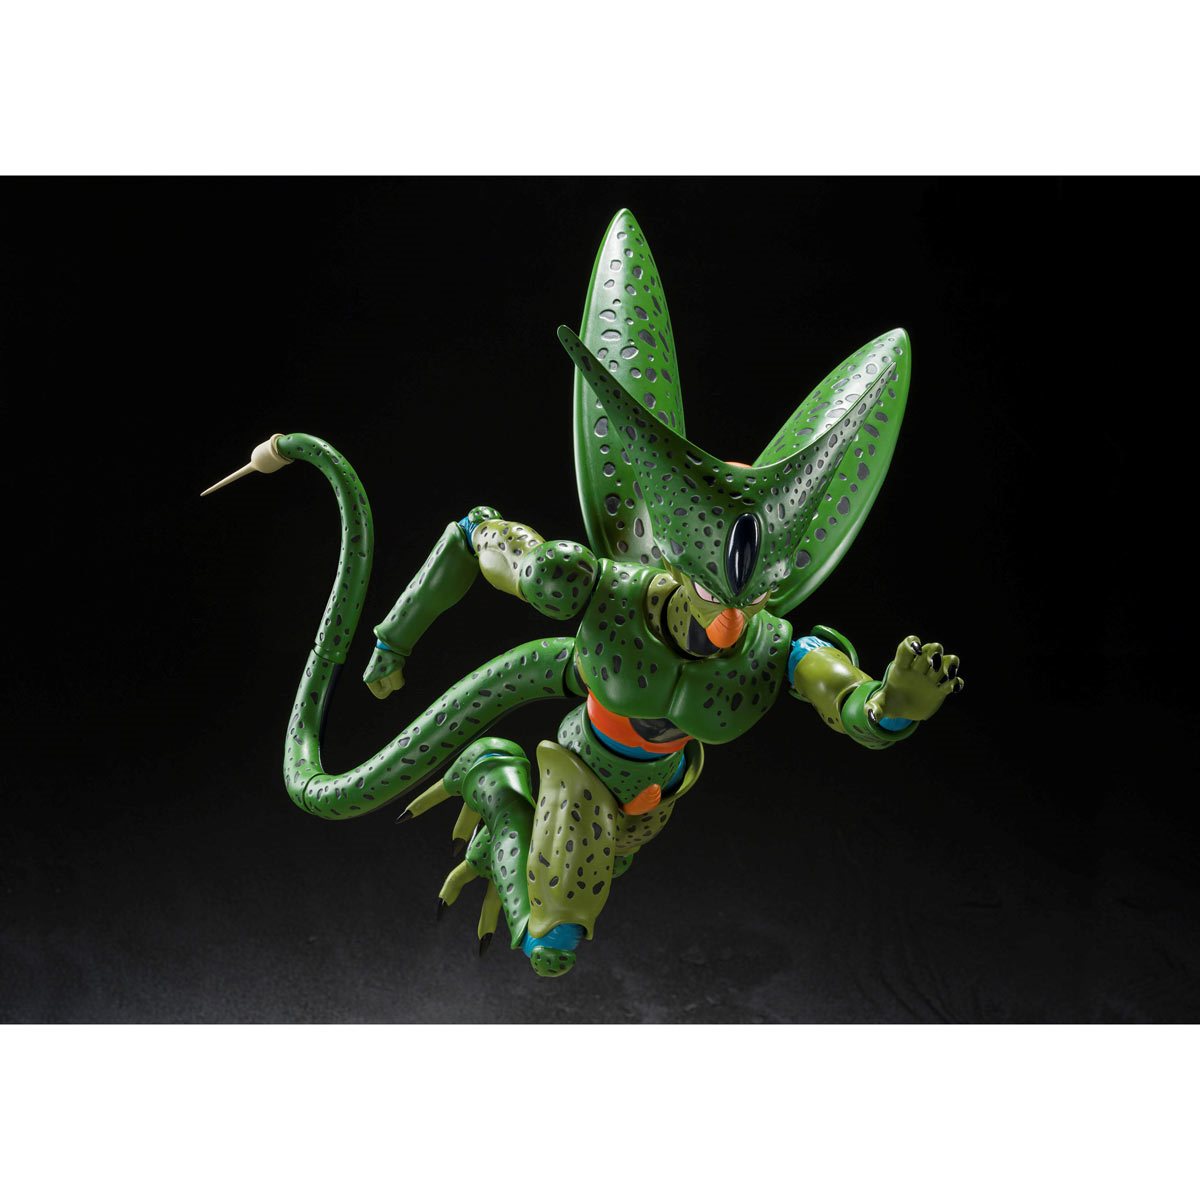 
                  
                    Dragon Ball Z Cell First Form S.H.Figuarts Action Figure - A highly detailed and articulated plastic figure of Cell in his First Form from Dragon Ball Z. Stands over 6 inches tall, featuring interchangeable hands, faces, and tail parts.
                  
                